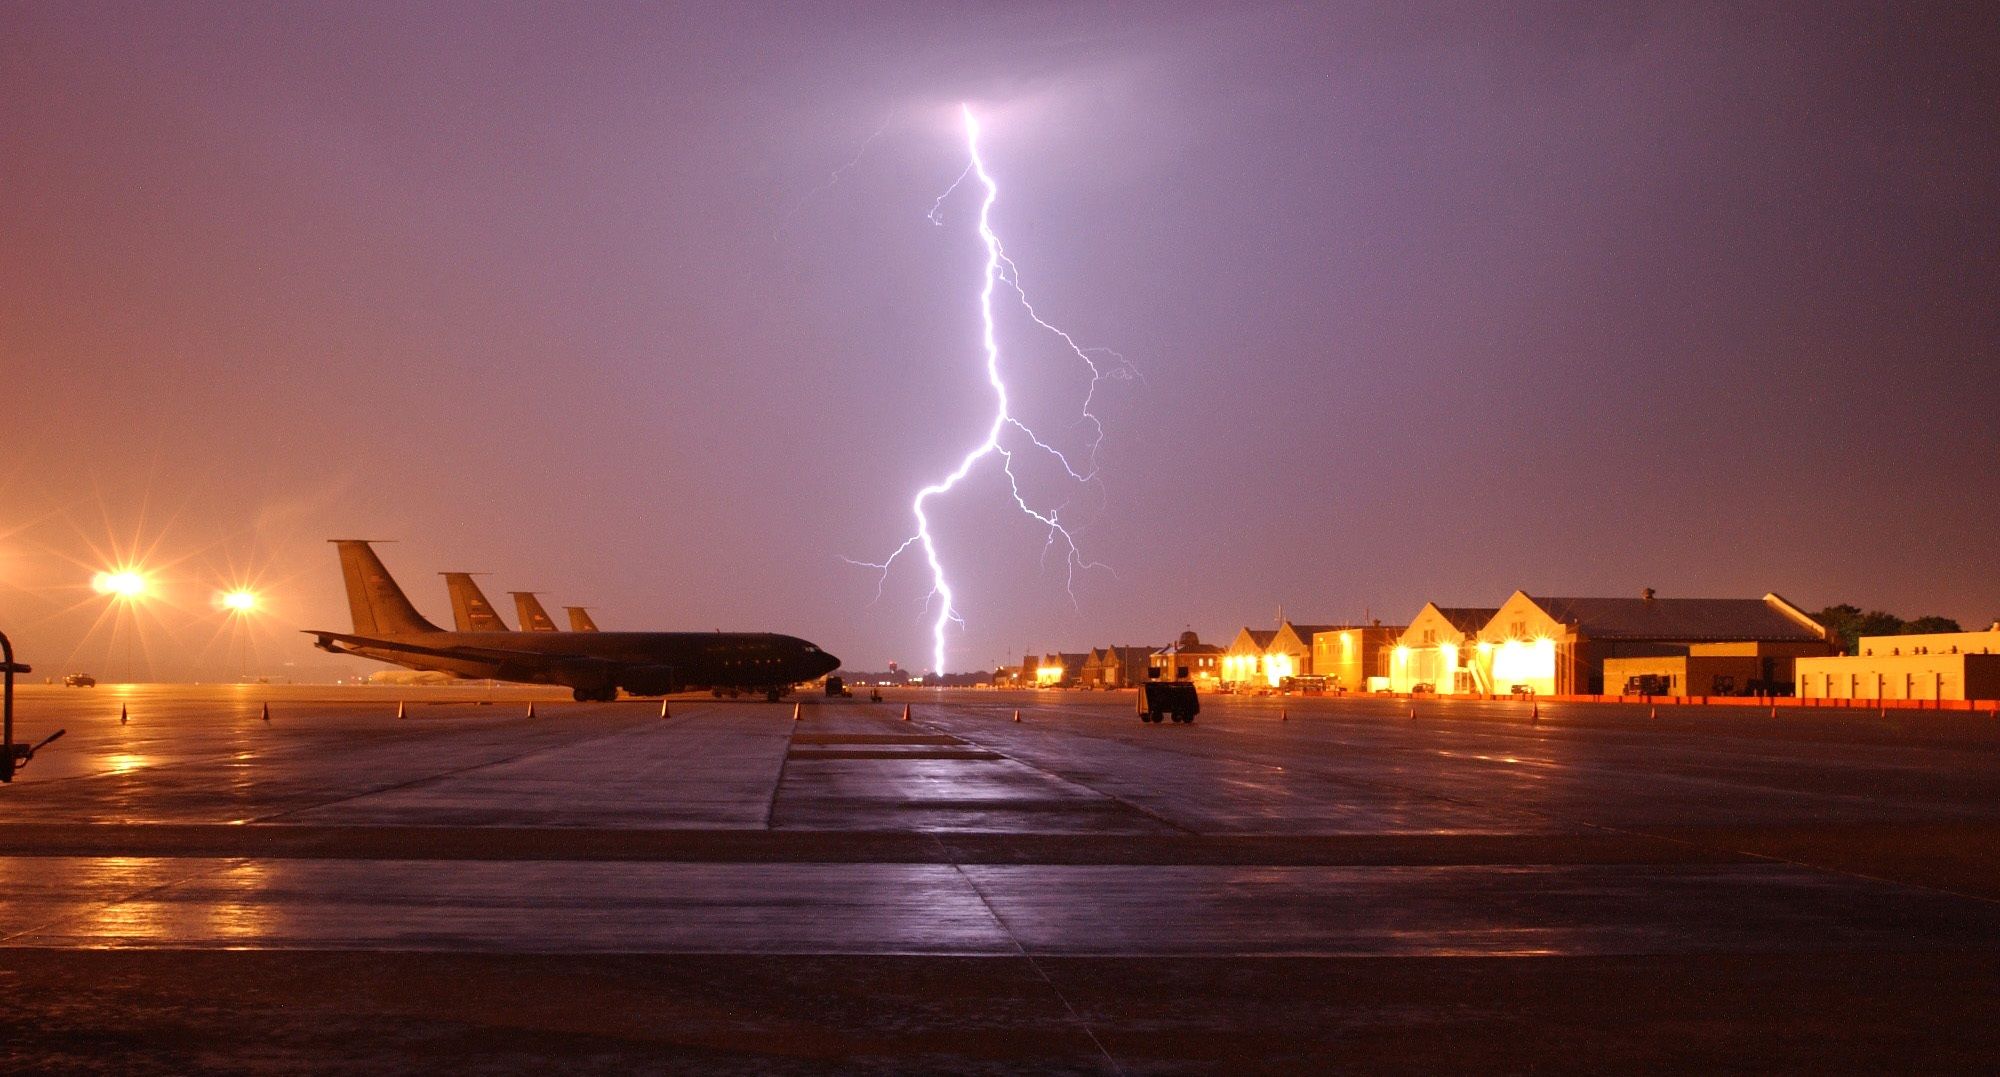 many aircraft lined up at an airfield during a thunderstorm.